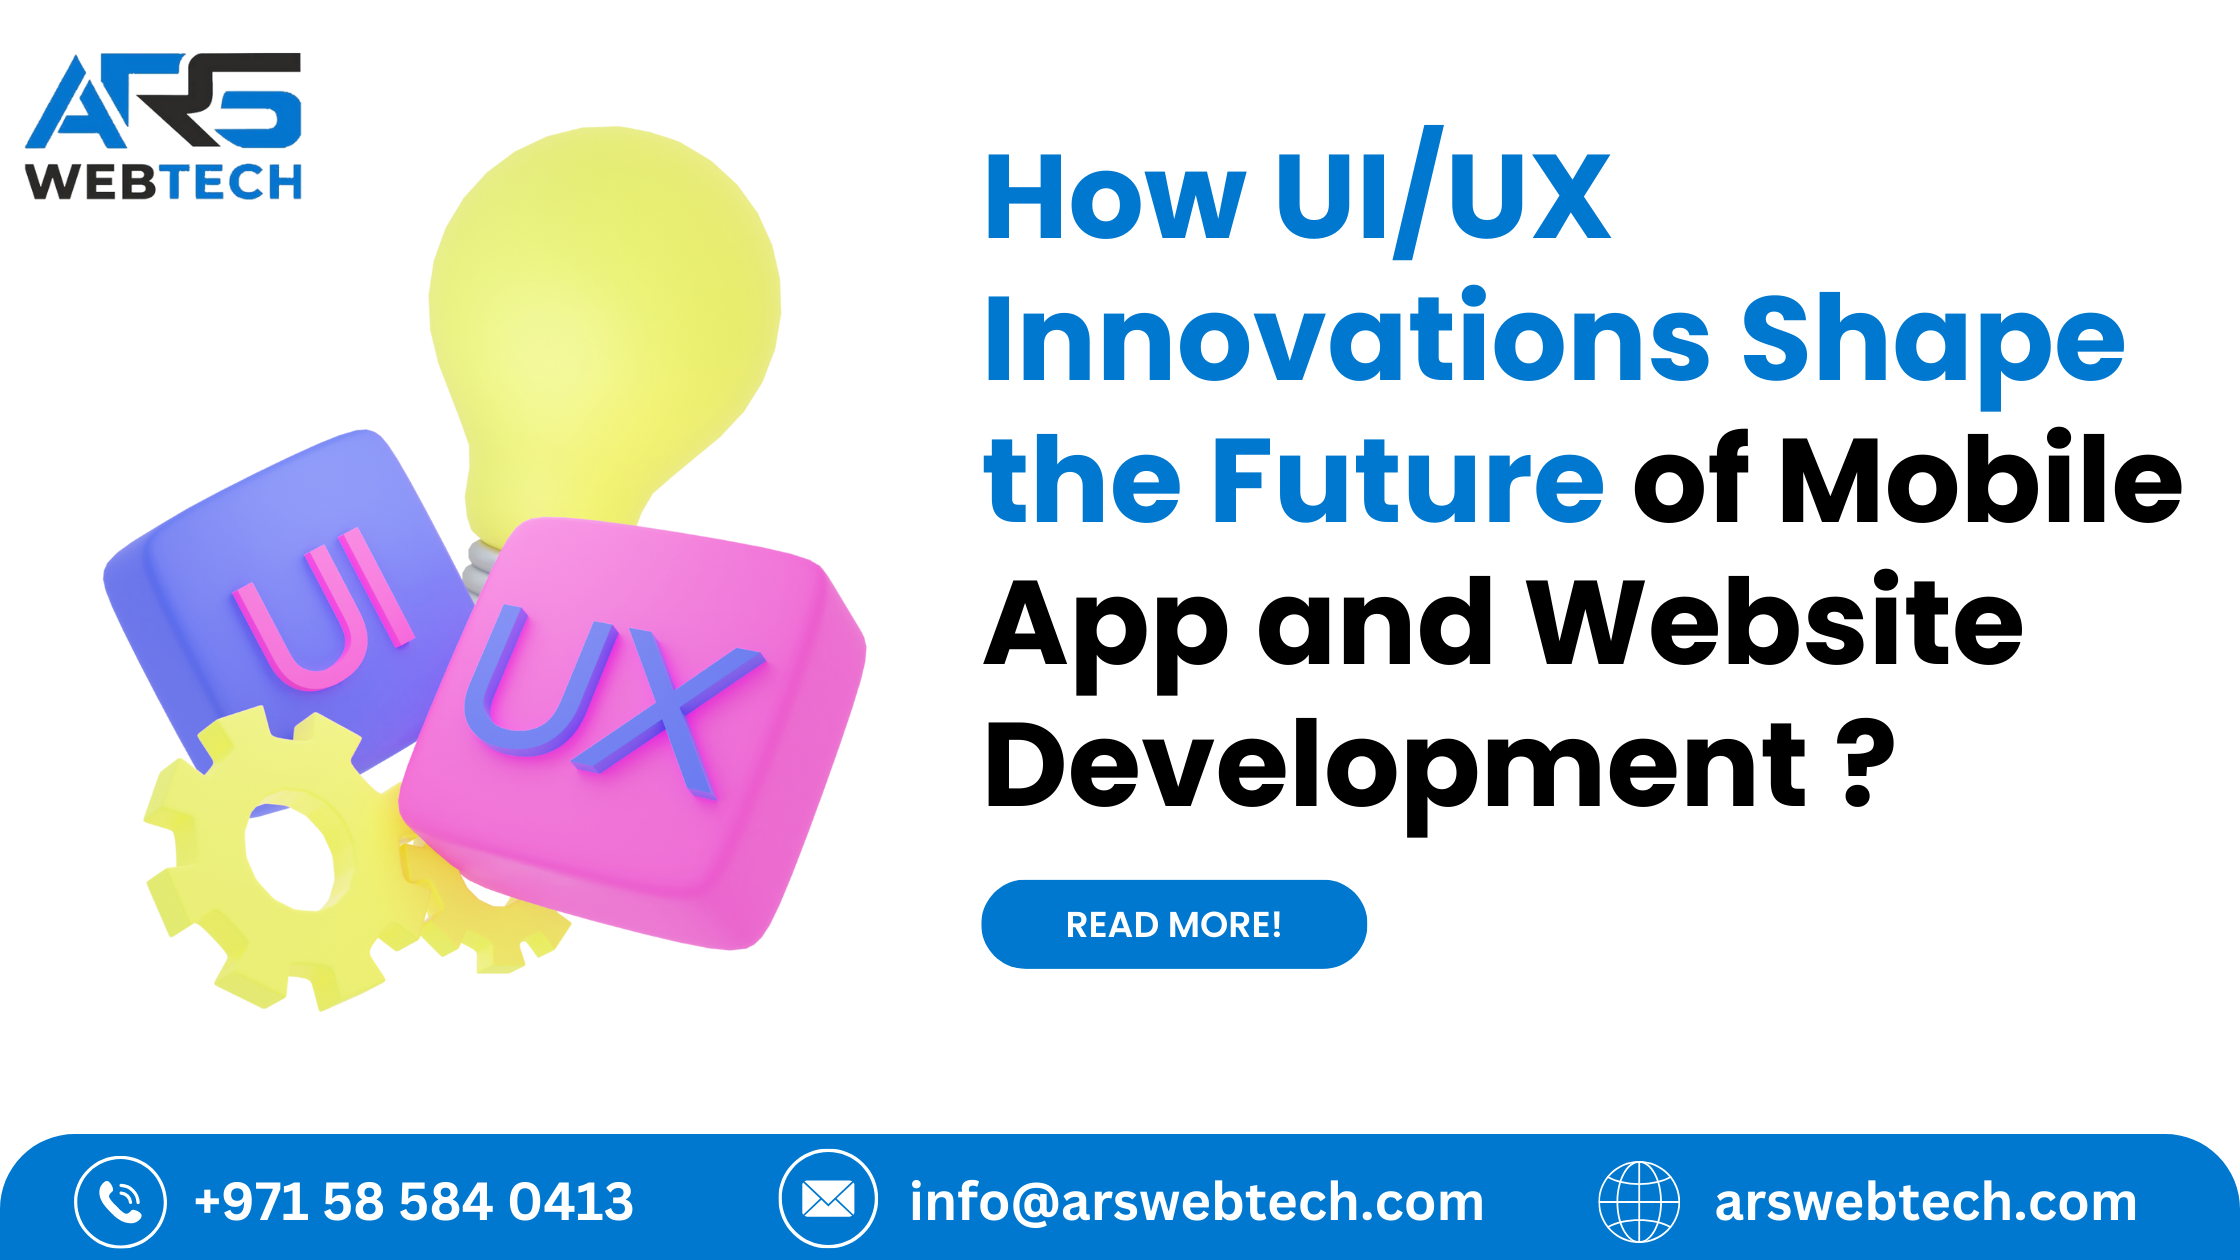 How UI/UX Innovations Shape the Future of Mobile App and Website Development